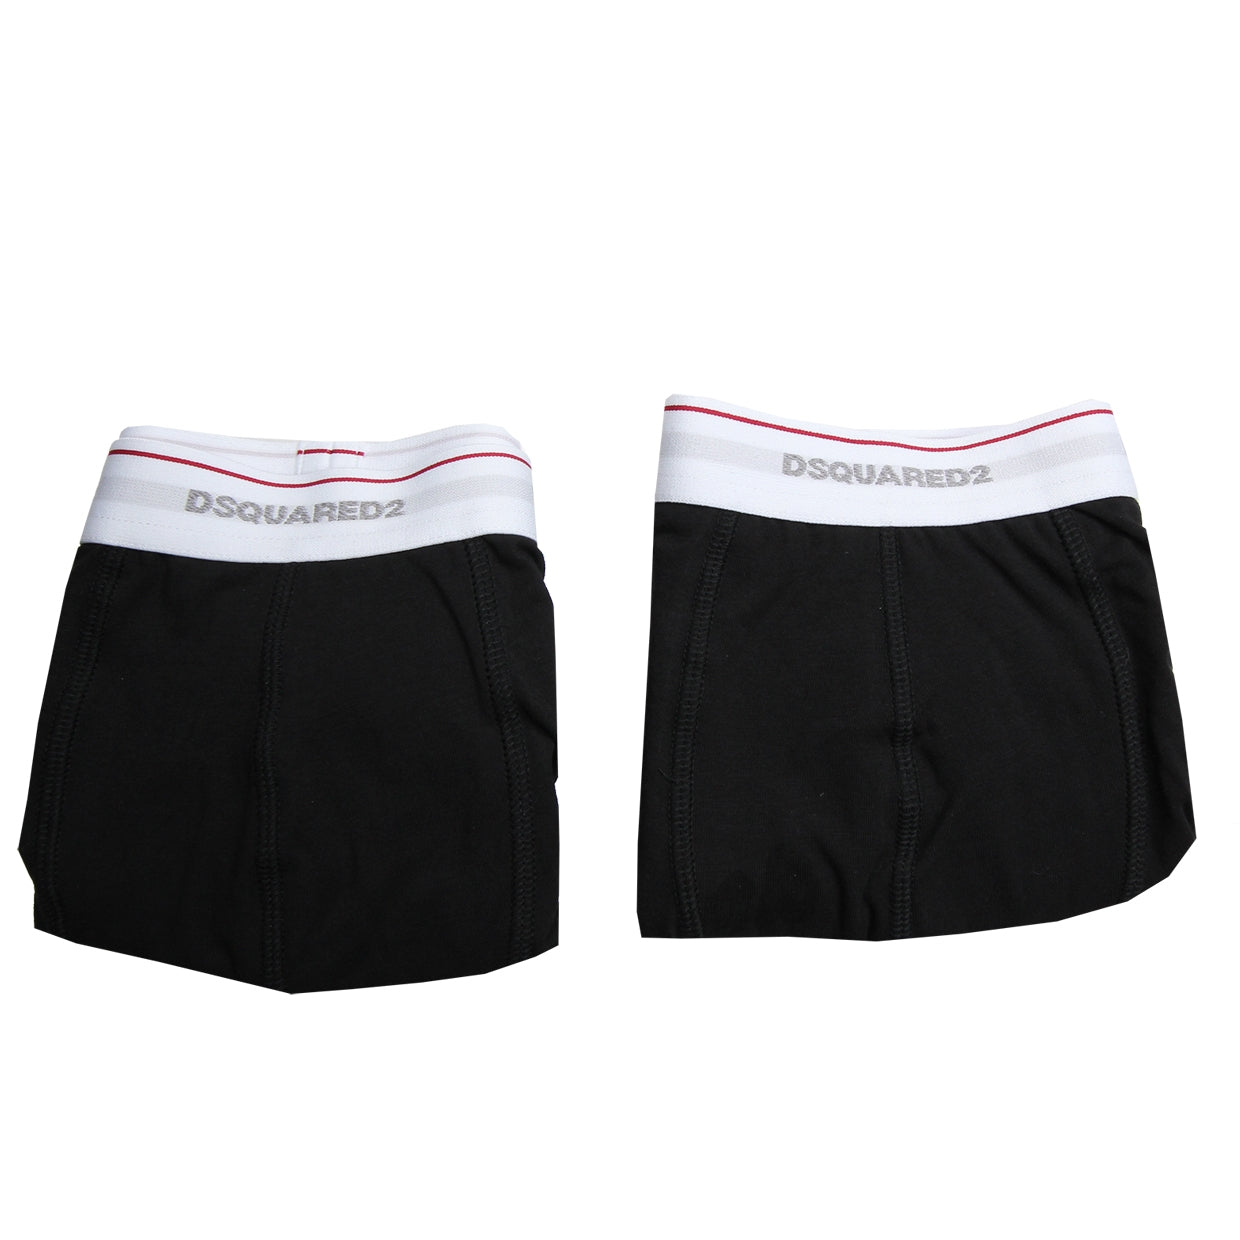 DSquared2 Twin Pack Black Cotton Stretch Boxer Shorts second 